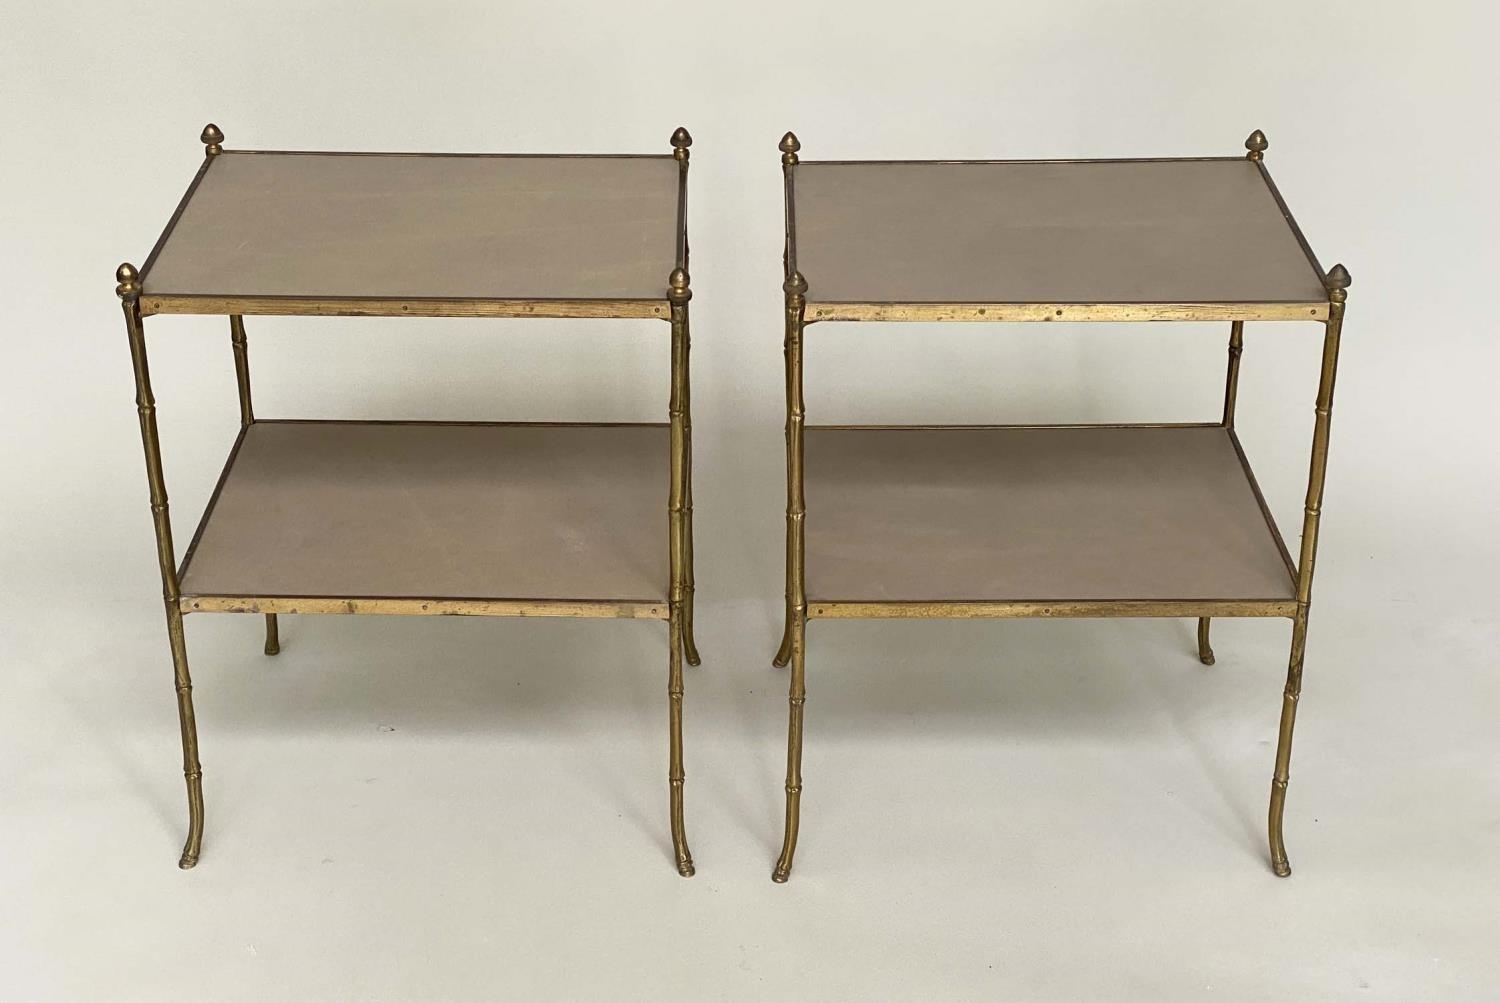 FAUX BAMBOO ETAGERES, a pair, early 20th century Regency style, gilt metal framed each with two